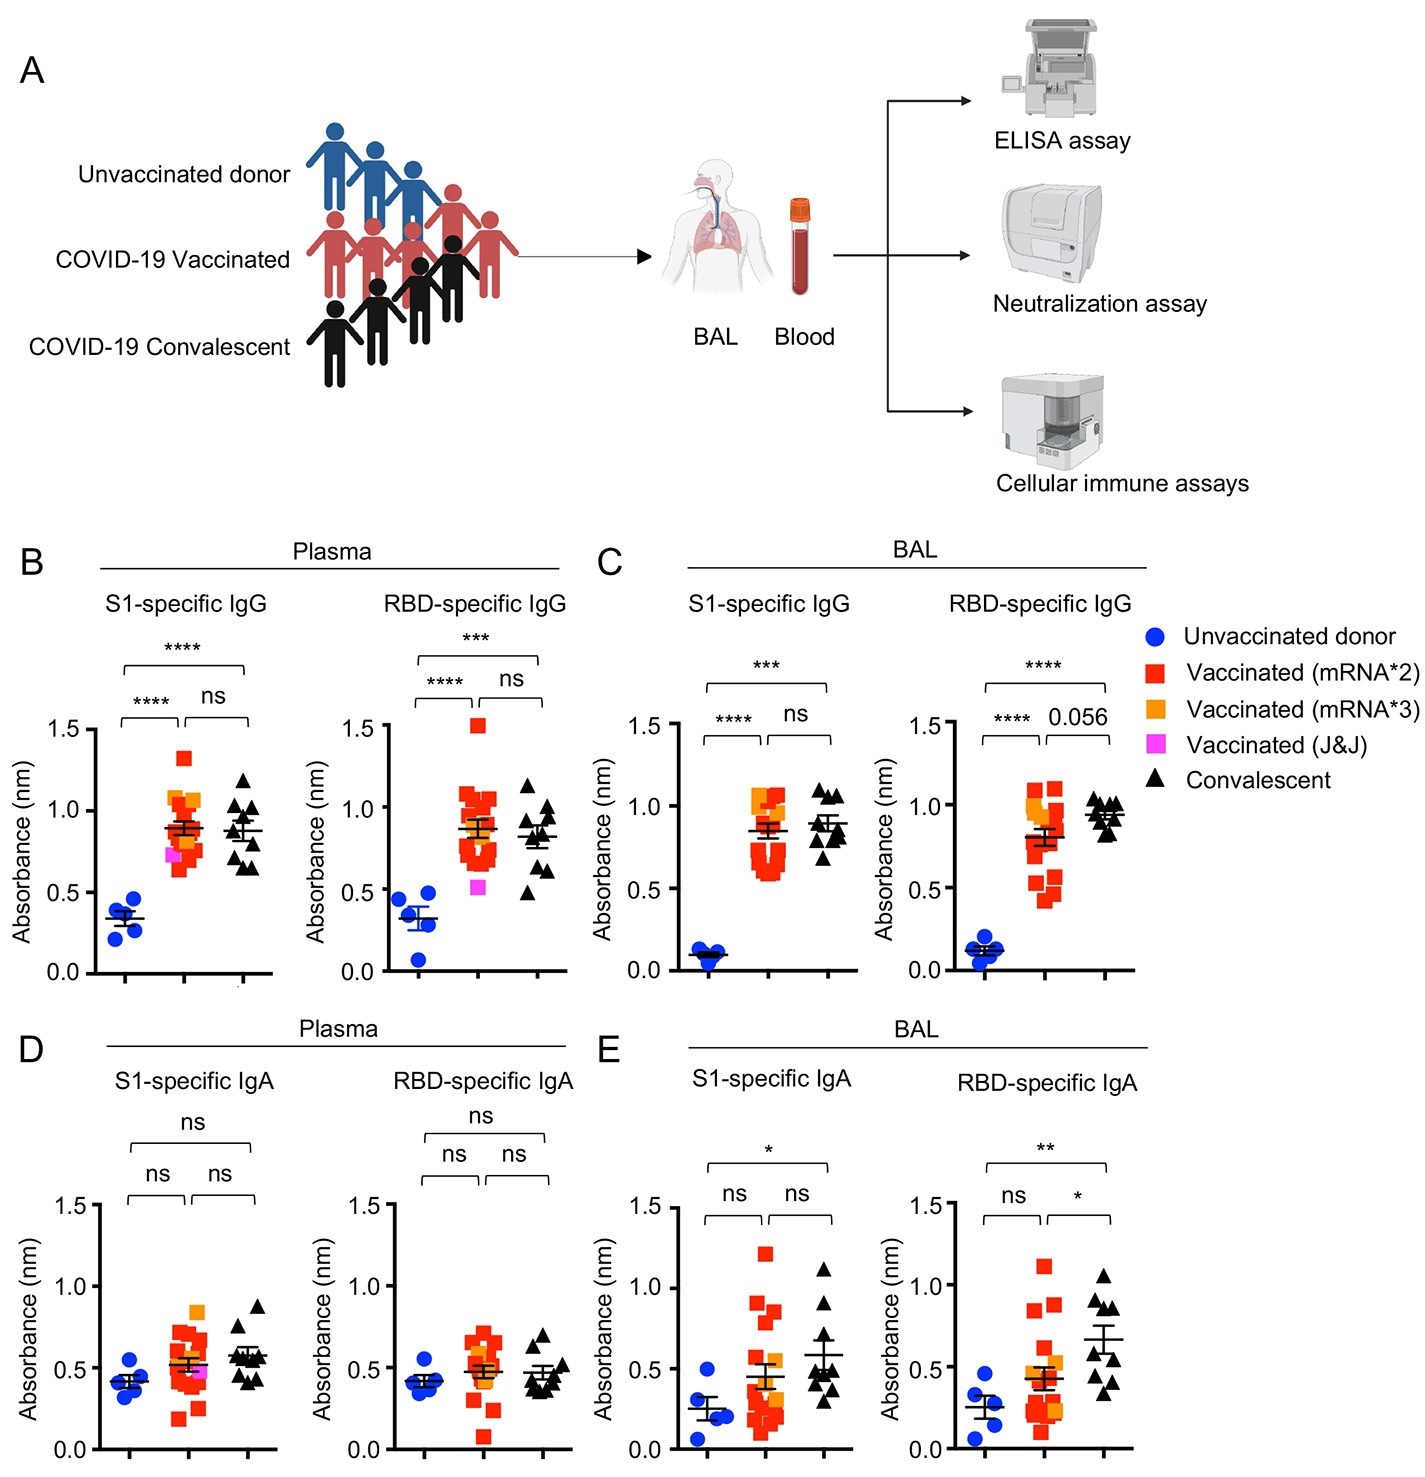 Systemic and respiratory antibody responses in COVID-19 convalescents and vaccinated individuals. (A) Schematic of recruited cohorts (n=5 for unvaccinated donor,